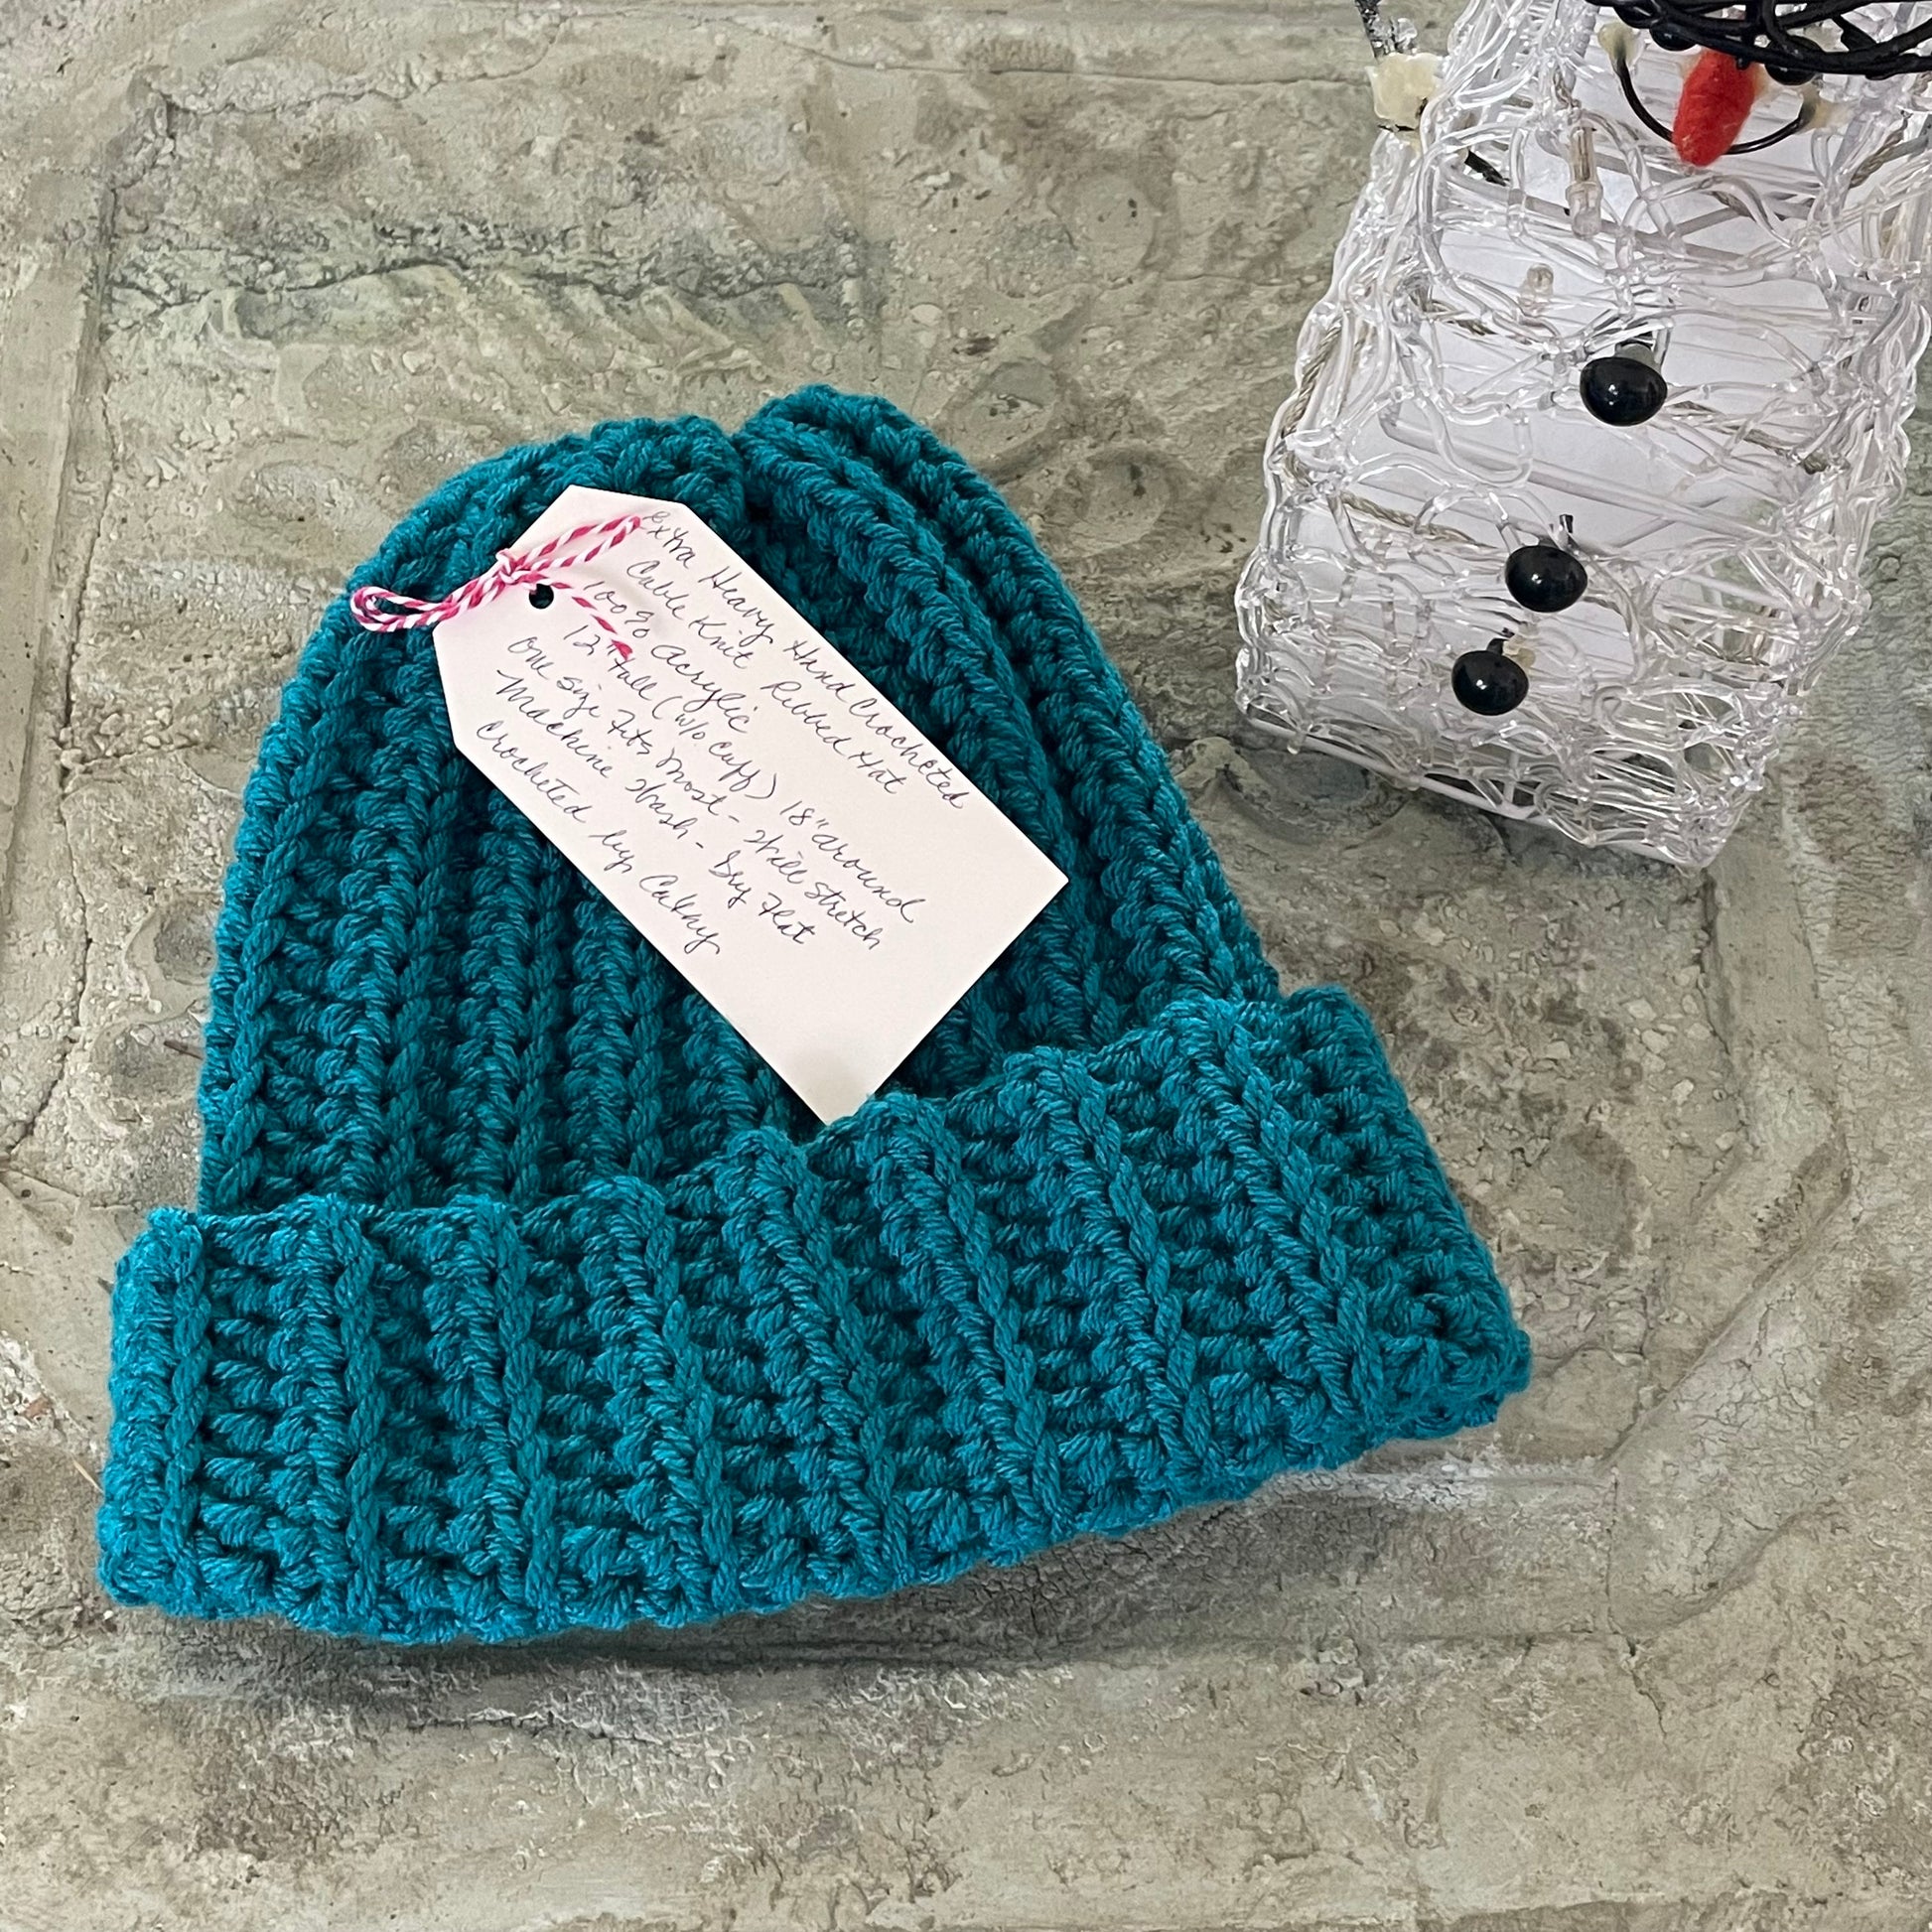 Extra Warm Ribbed Cable Knit Hat Solid Blue Green Hand Crocheted Beanie Winter Unisex Outdoor Stretch Adjustable Cuff